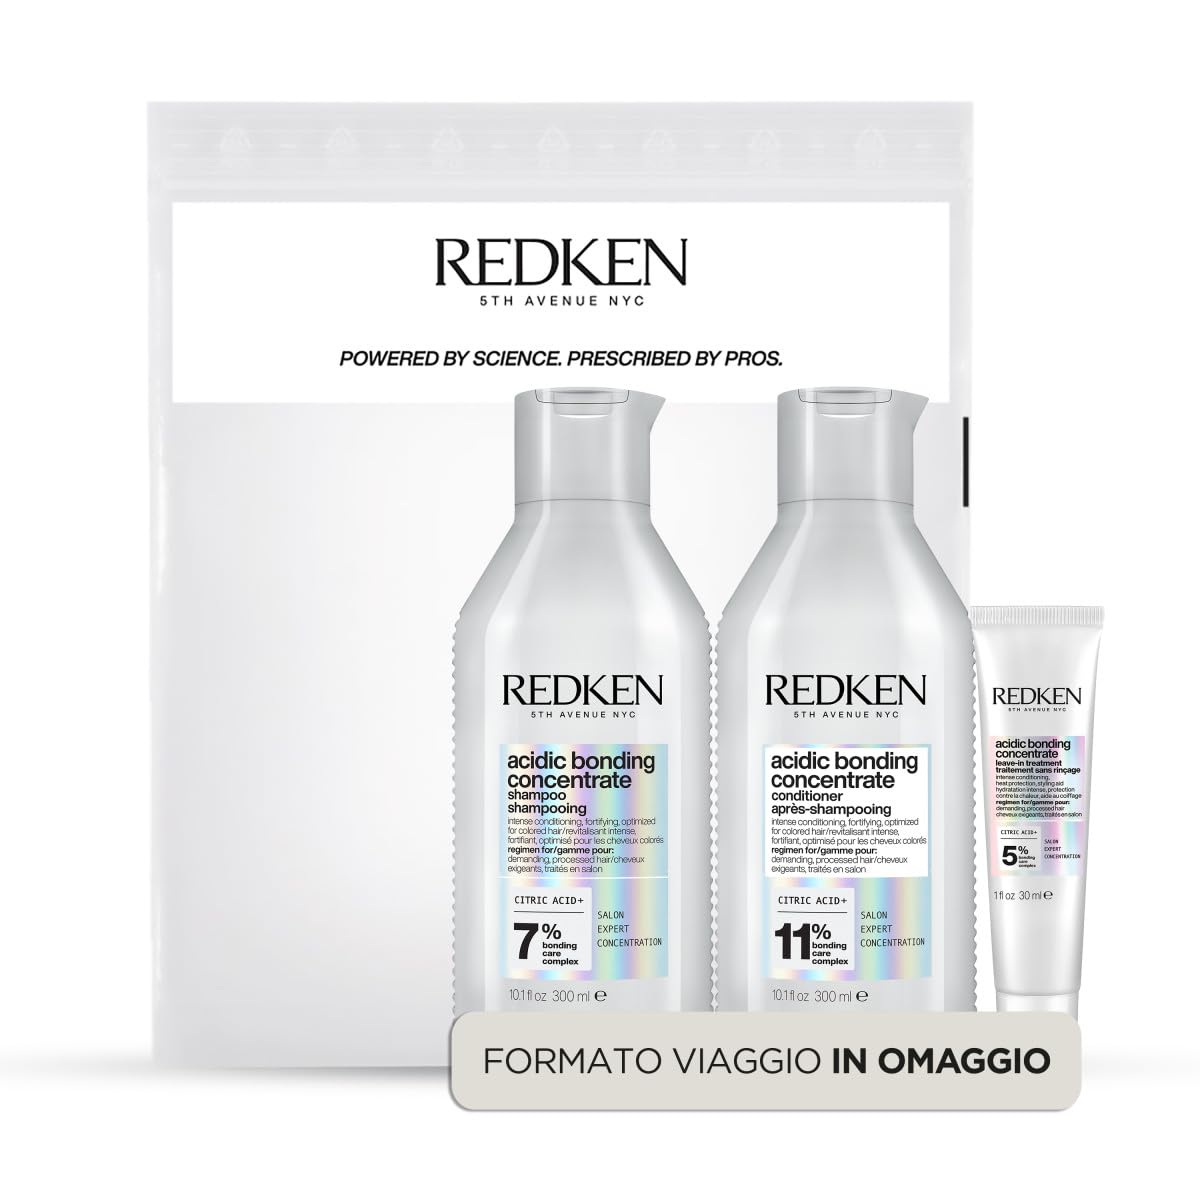 Redken Kit Shampoo 300 ml + Conditioner 300 ml + Leave - in 30 ml Free for Damaged Hair, Acid Bonding Concentrate